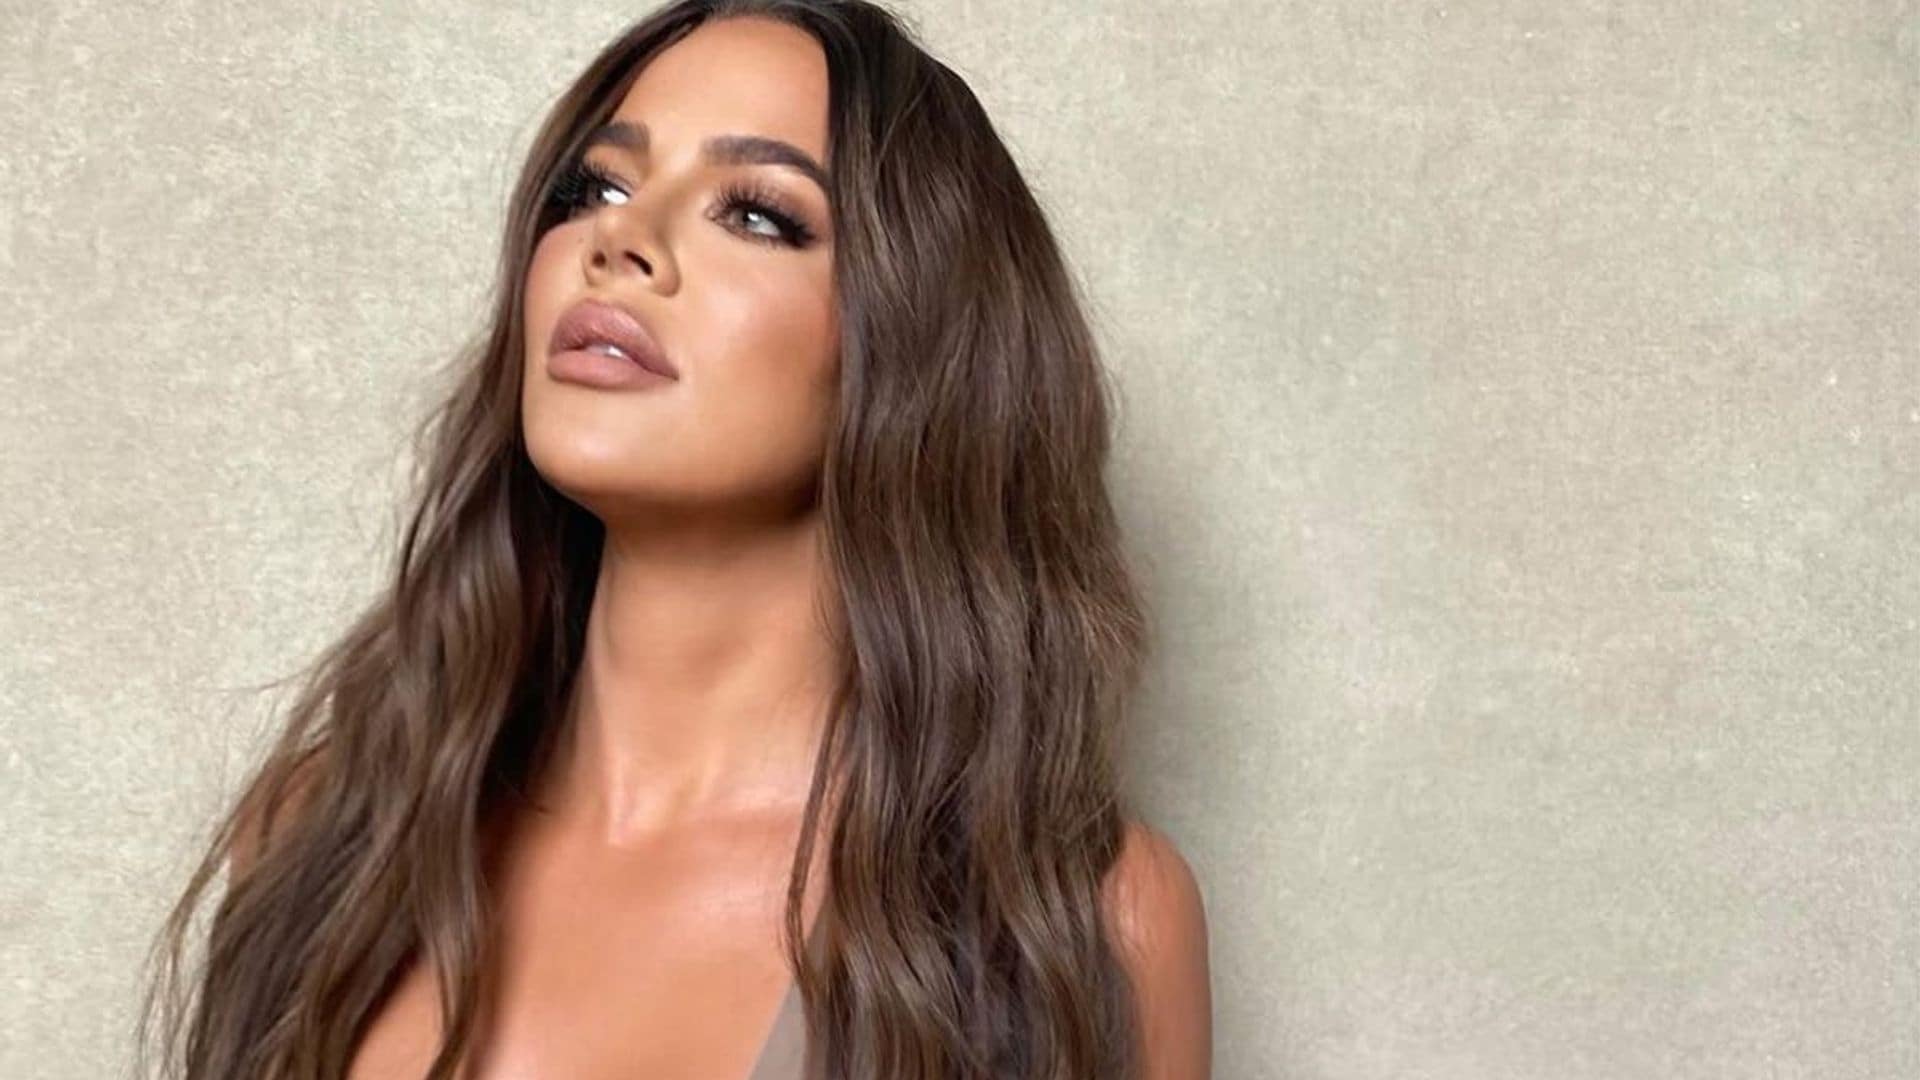 Khloe Kardashian thanks fan for calling out headlines that hurt her ‘soul and confidence’